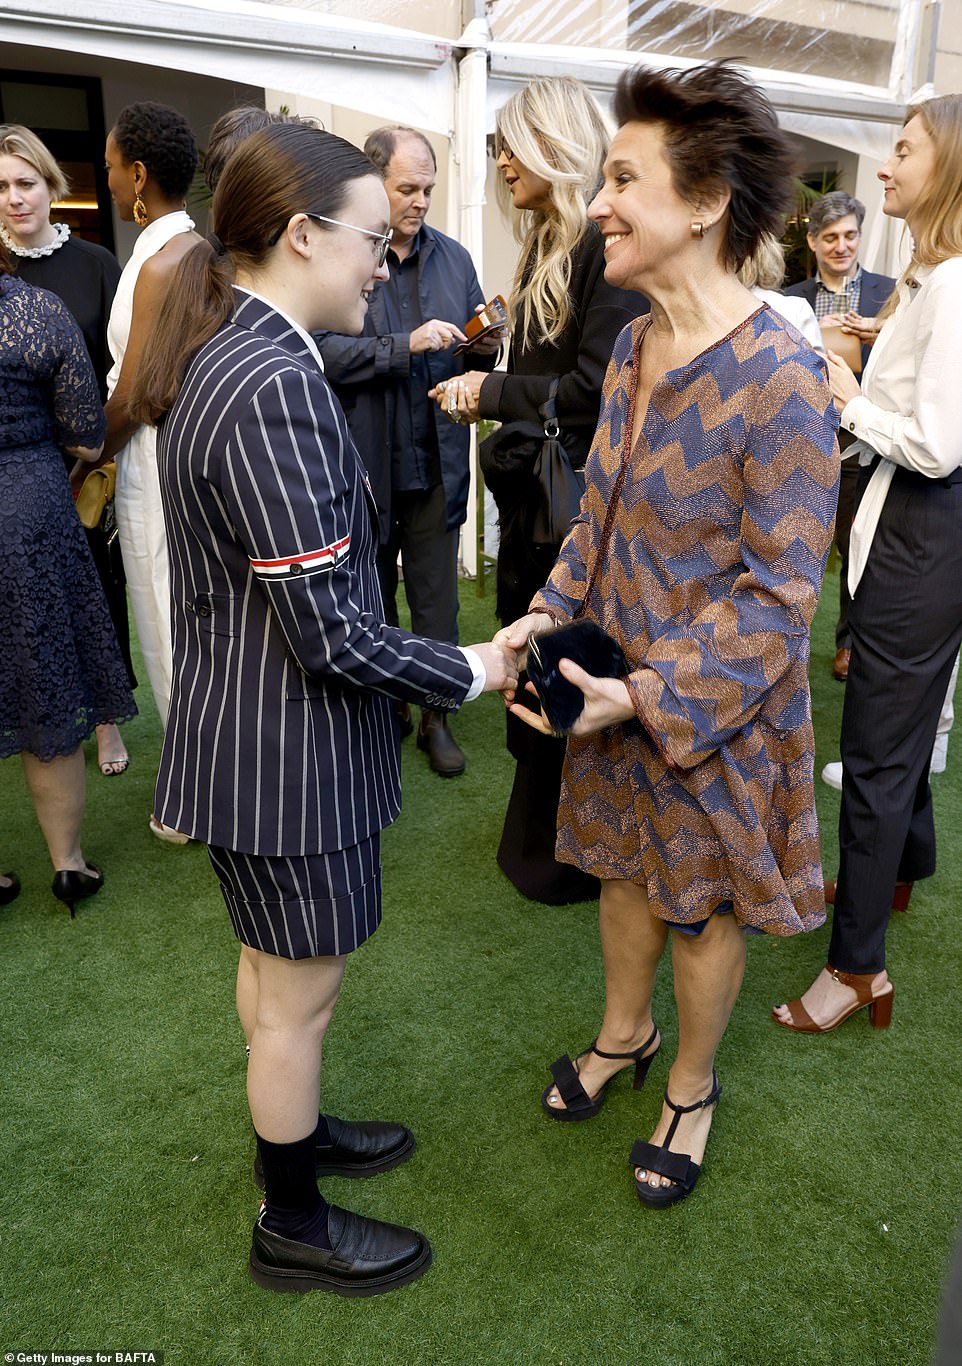 Bella Ramsey was spotted shaking hands with Joyce Pierpoline as the pair met up at the festivities which was held outside